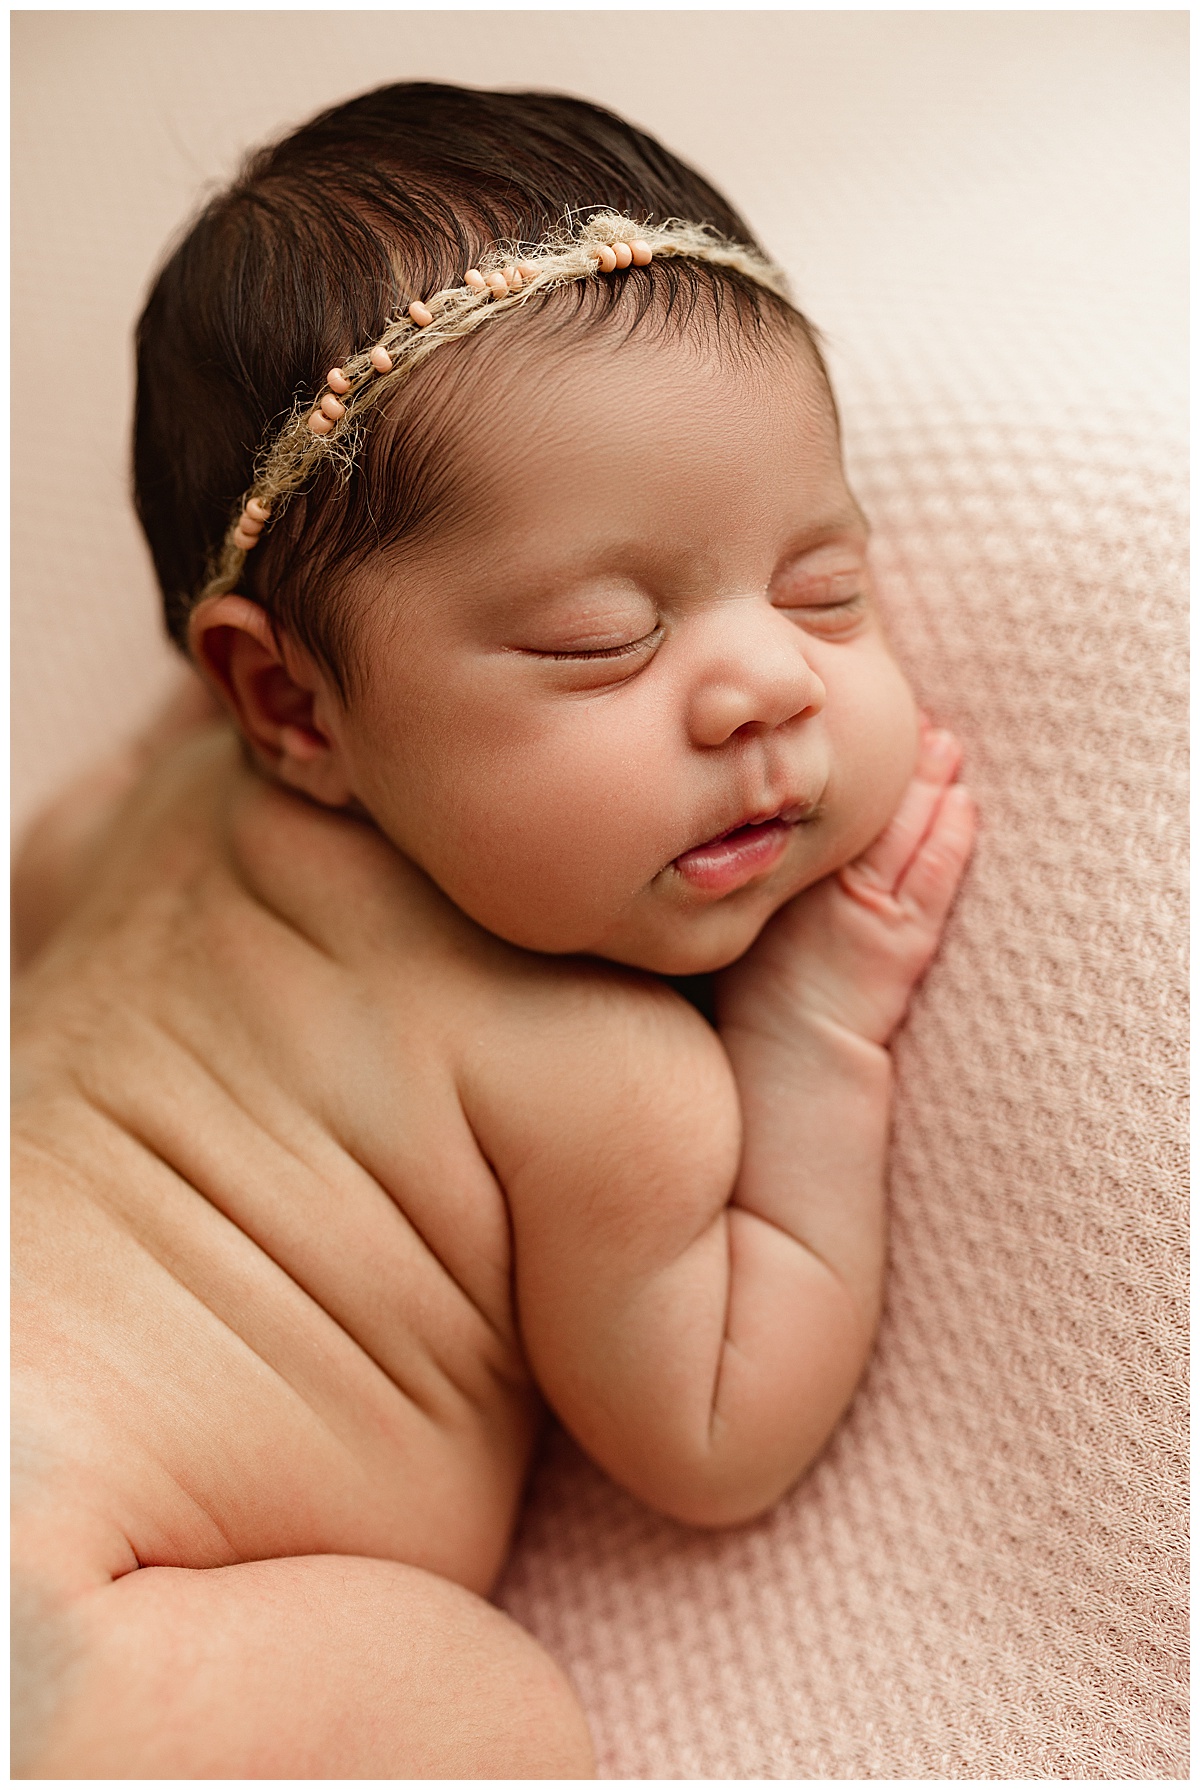 Newborn laying on tummy for Fine Art Posed Session